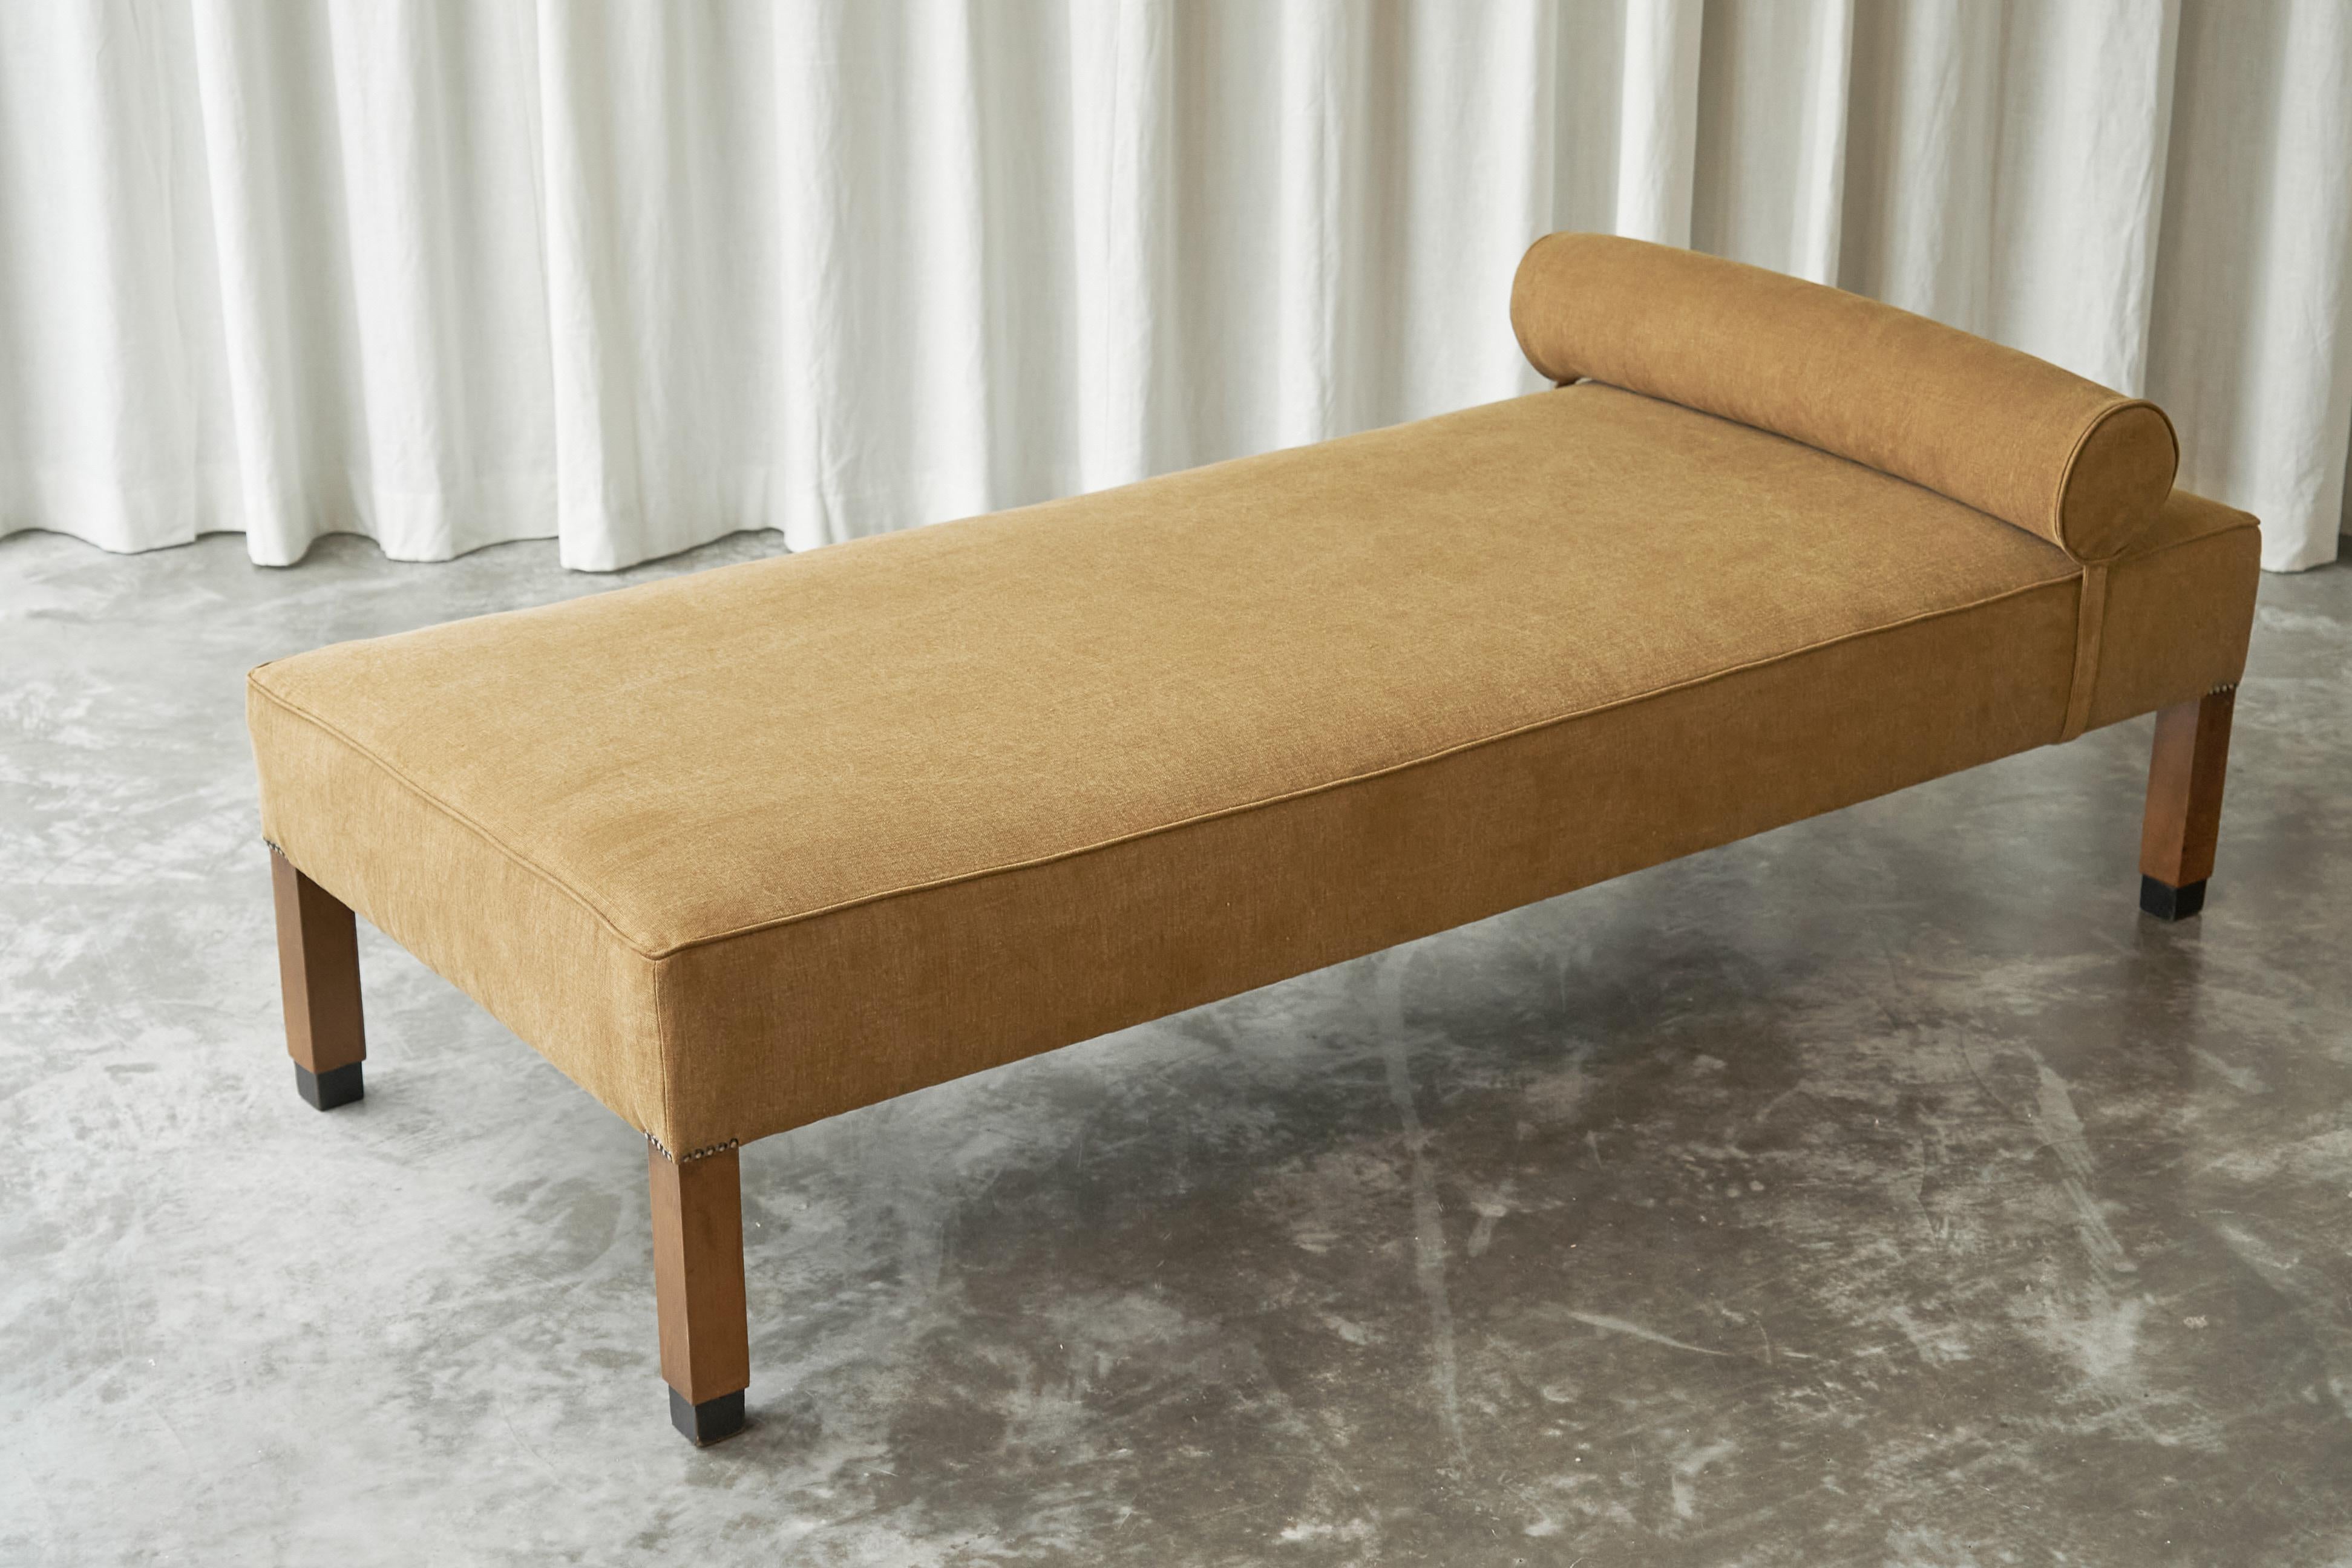 Hand-Crafted Art Deco Daybed in Stonewashed Linen 1930s For Sale